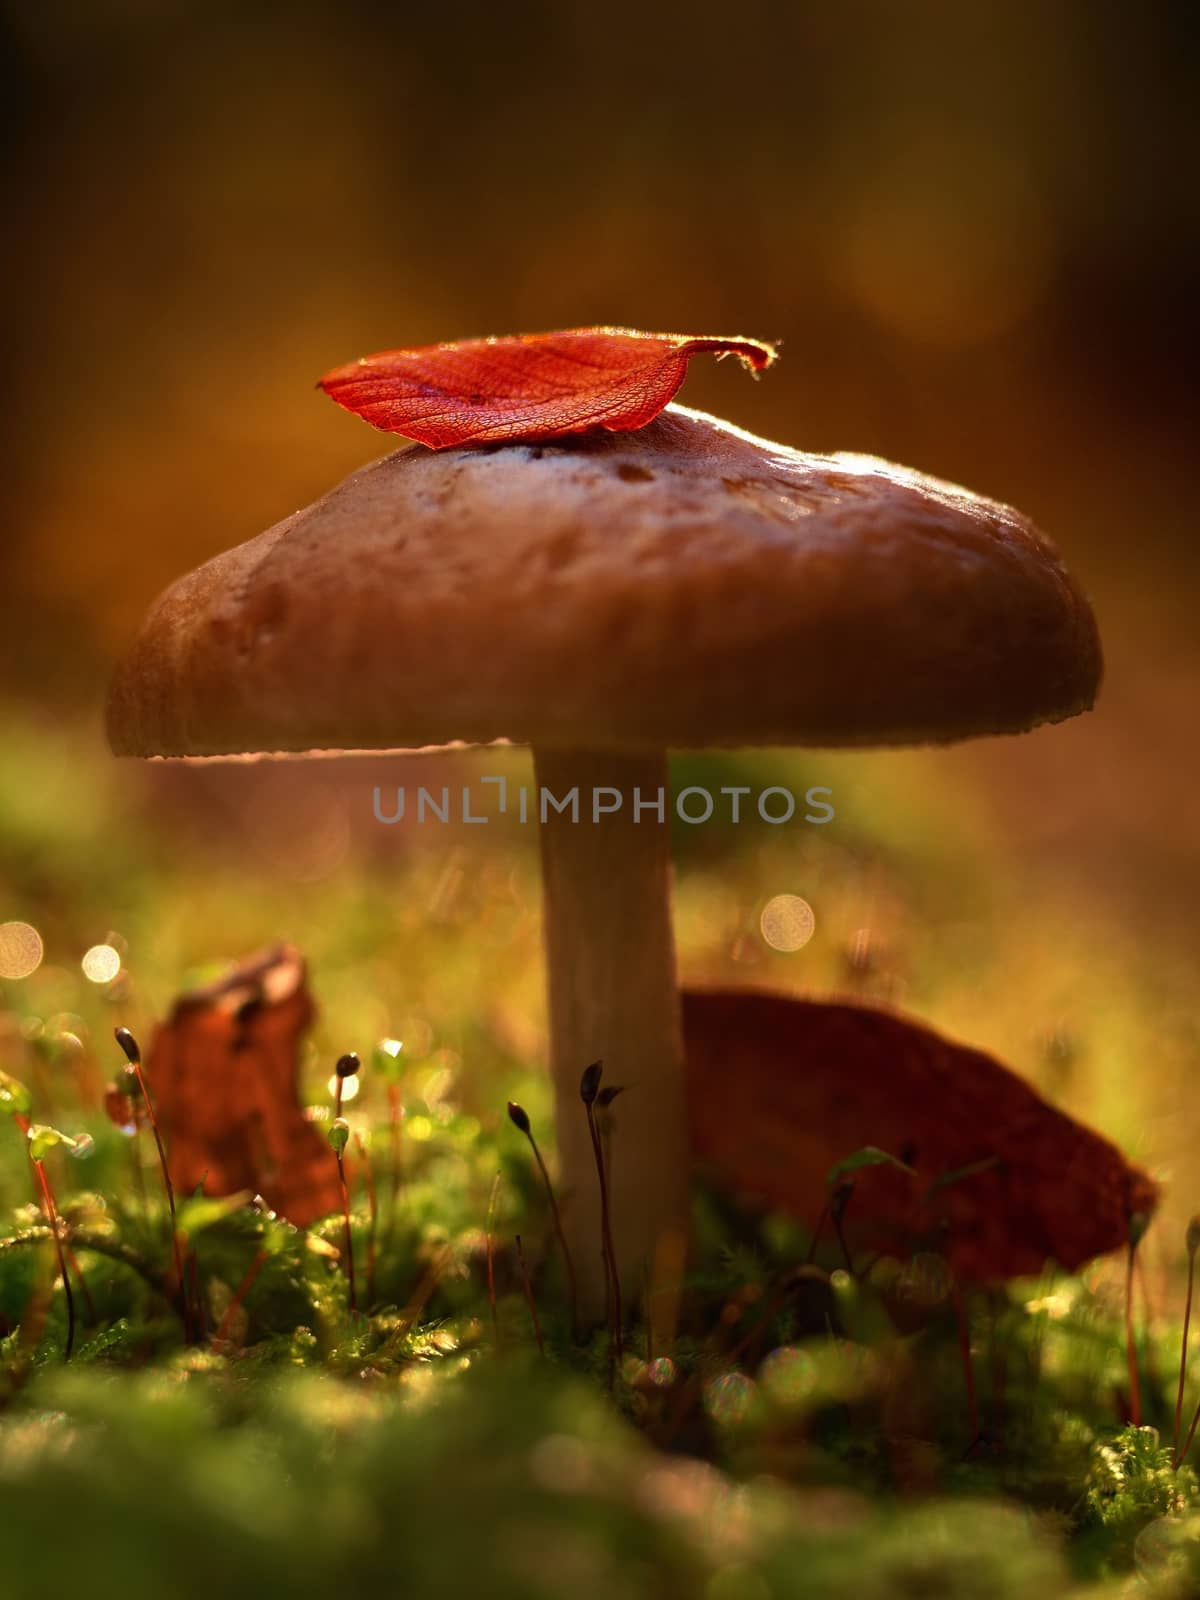 Mysterious wild muschroom in lighting forest. Slim stalk, fallen leaf on cap  with surreal light. Moss and fairytale mushroom